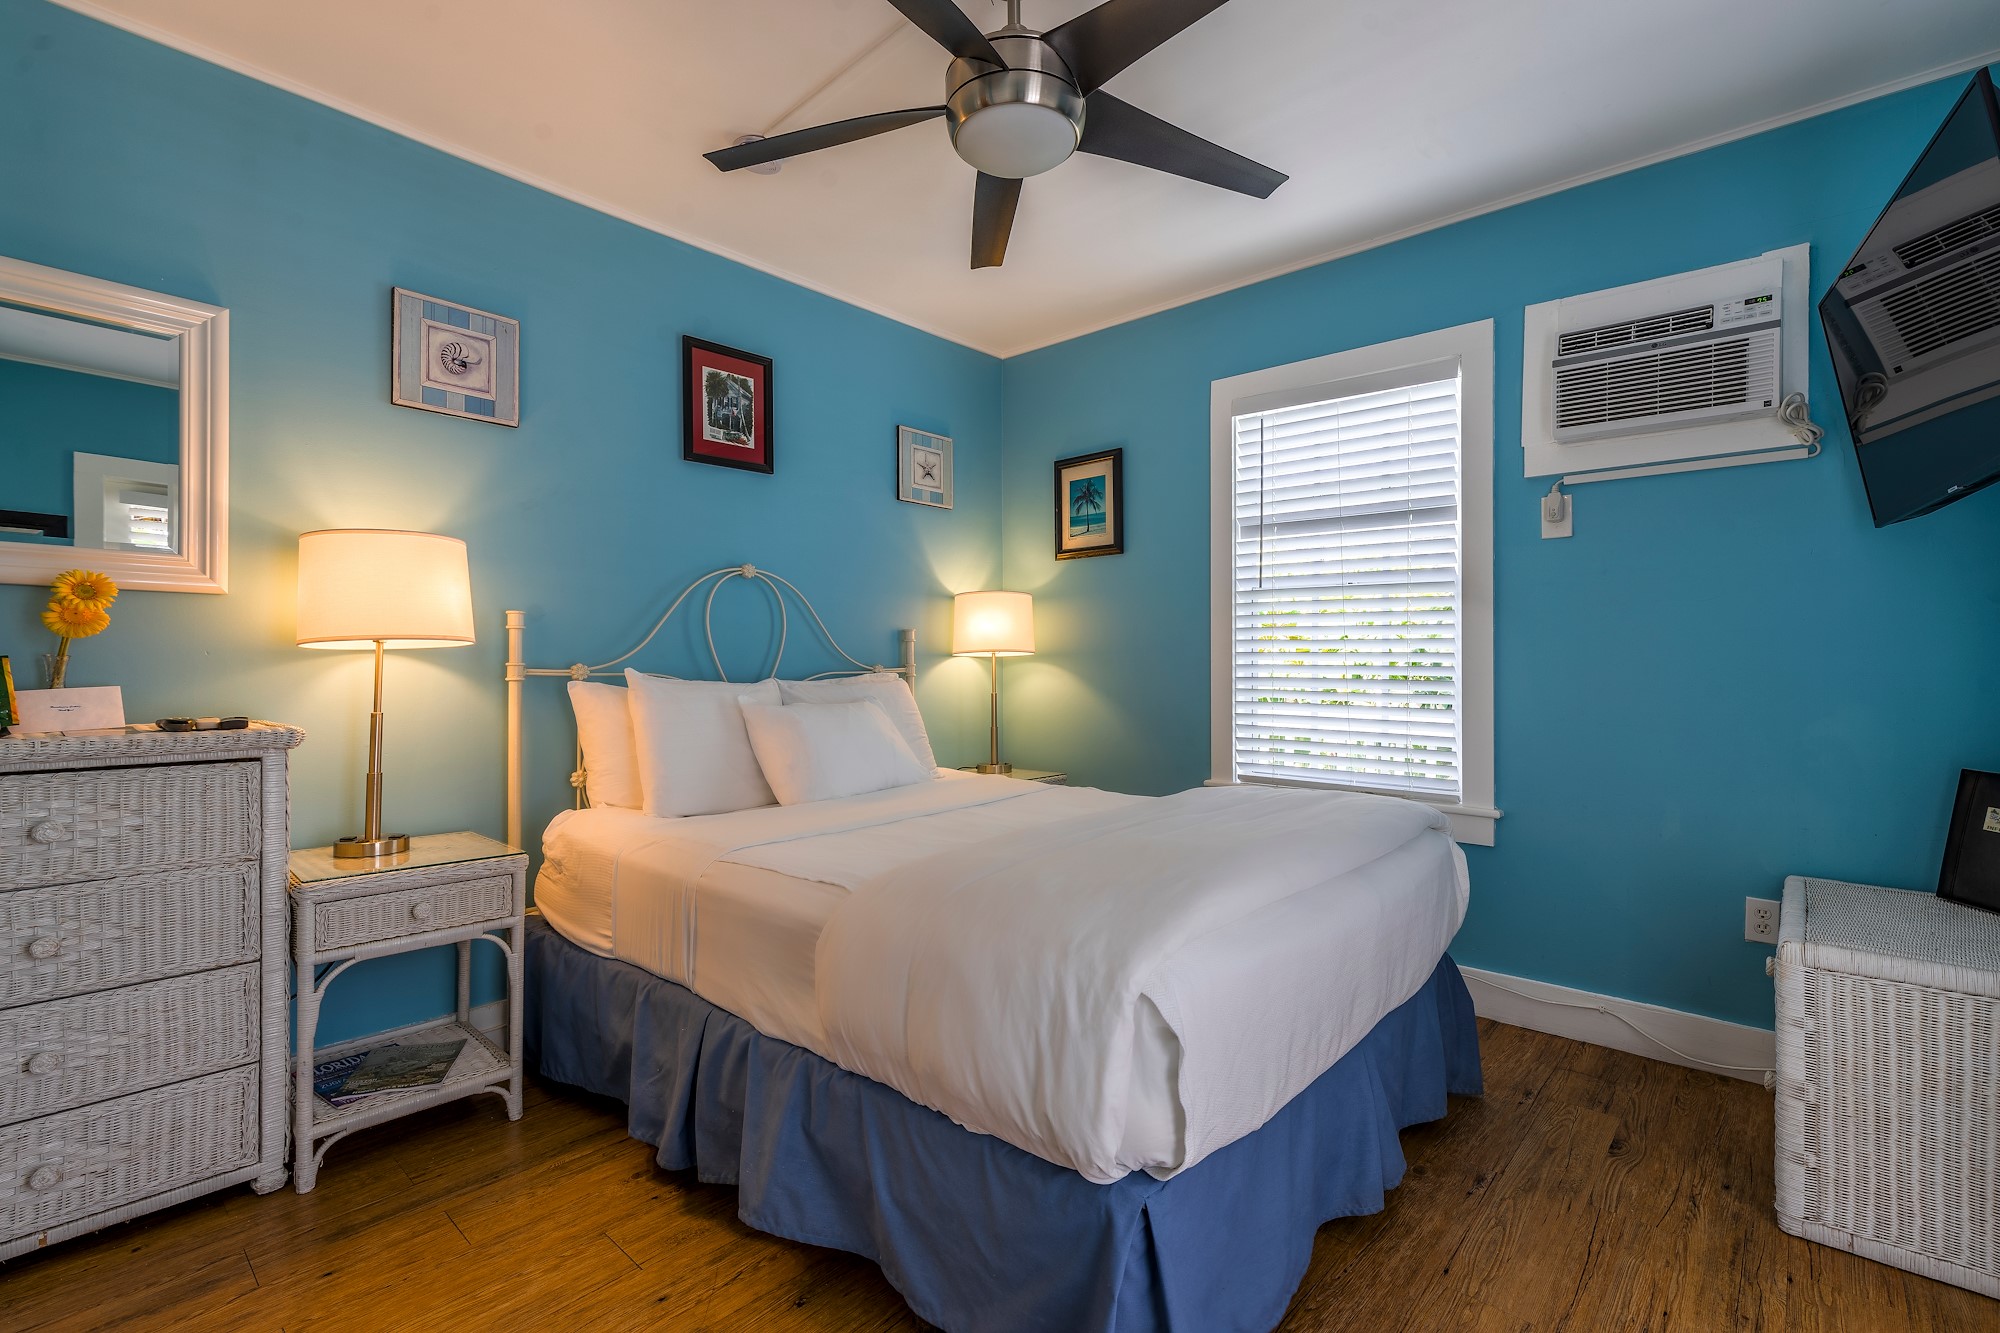 Our Key West Deluxe Queen Room with Patio